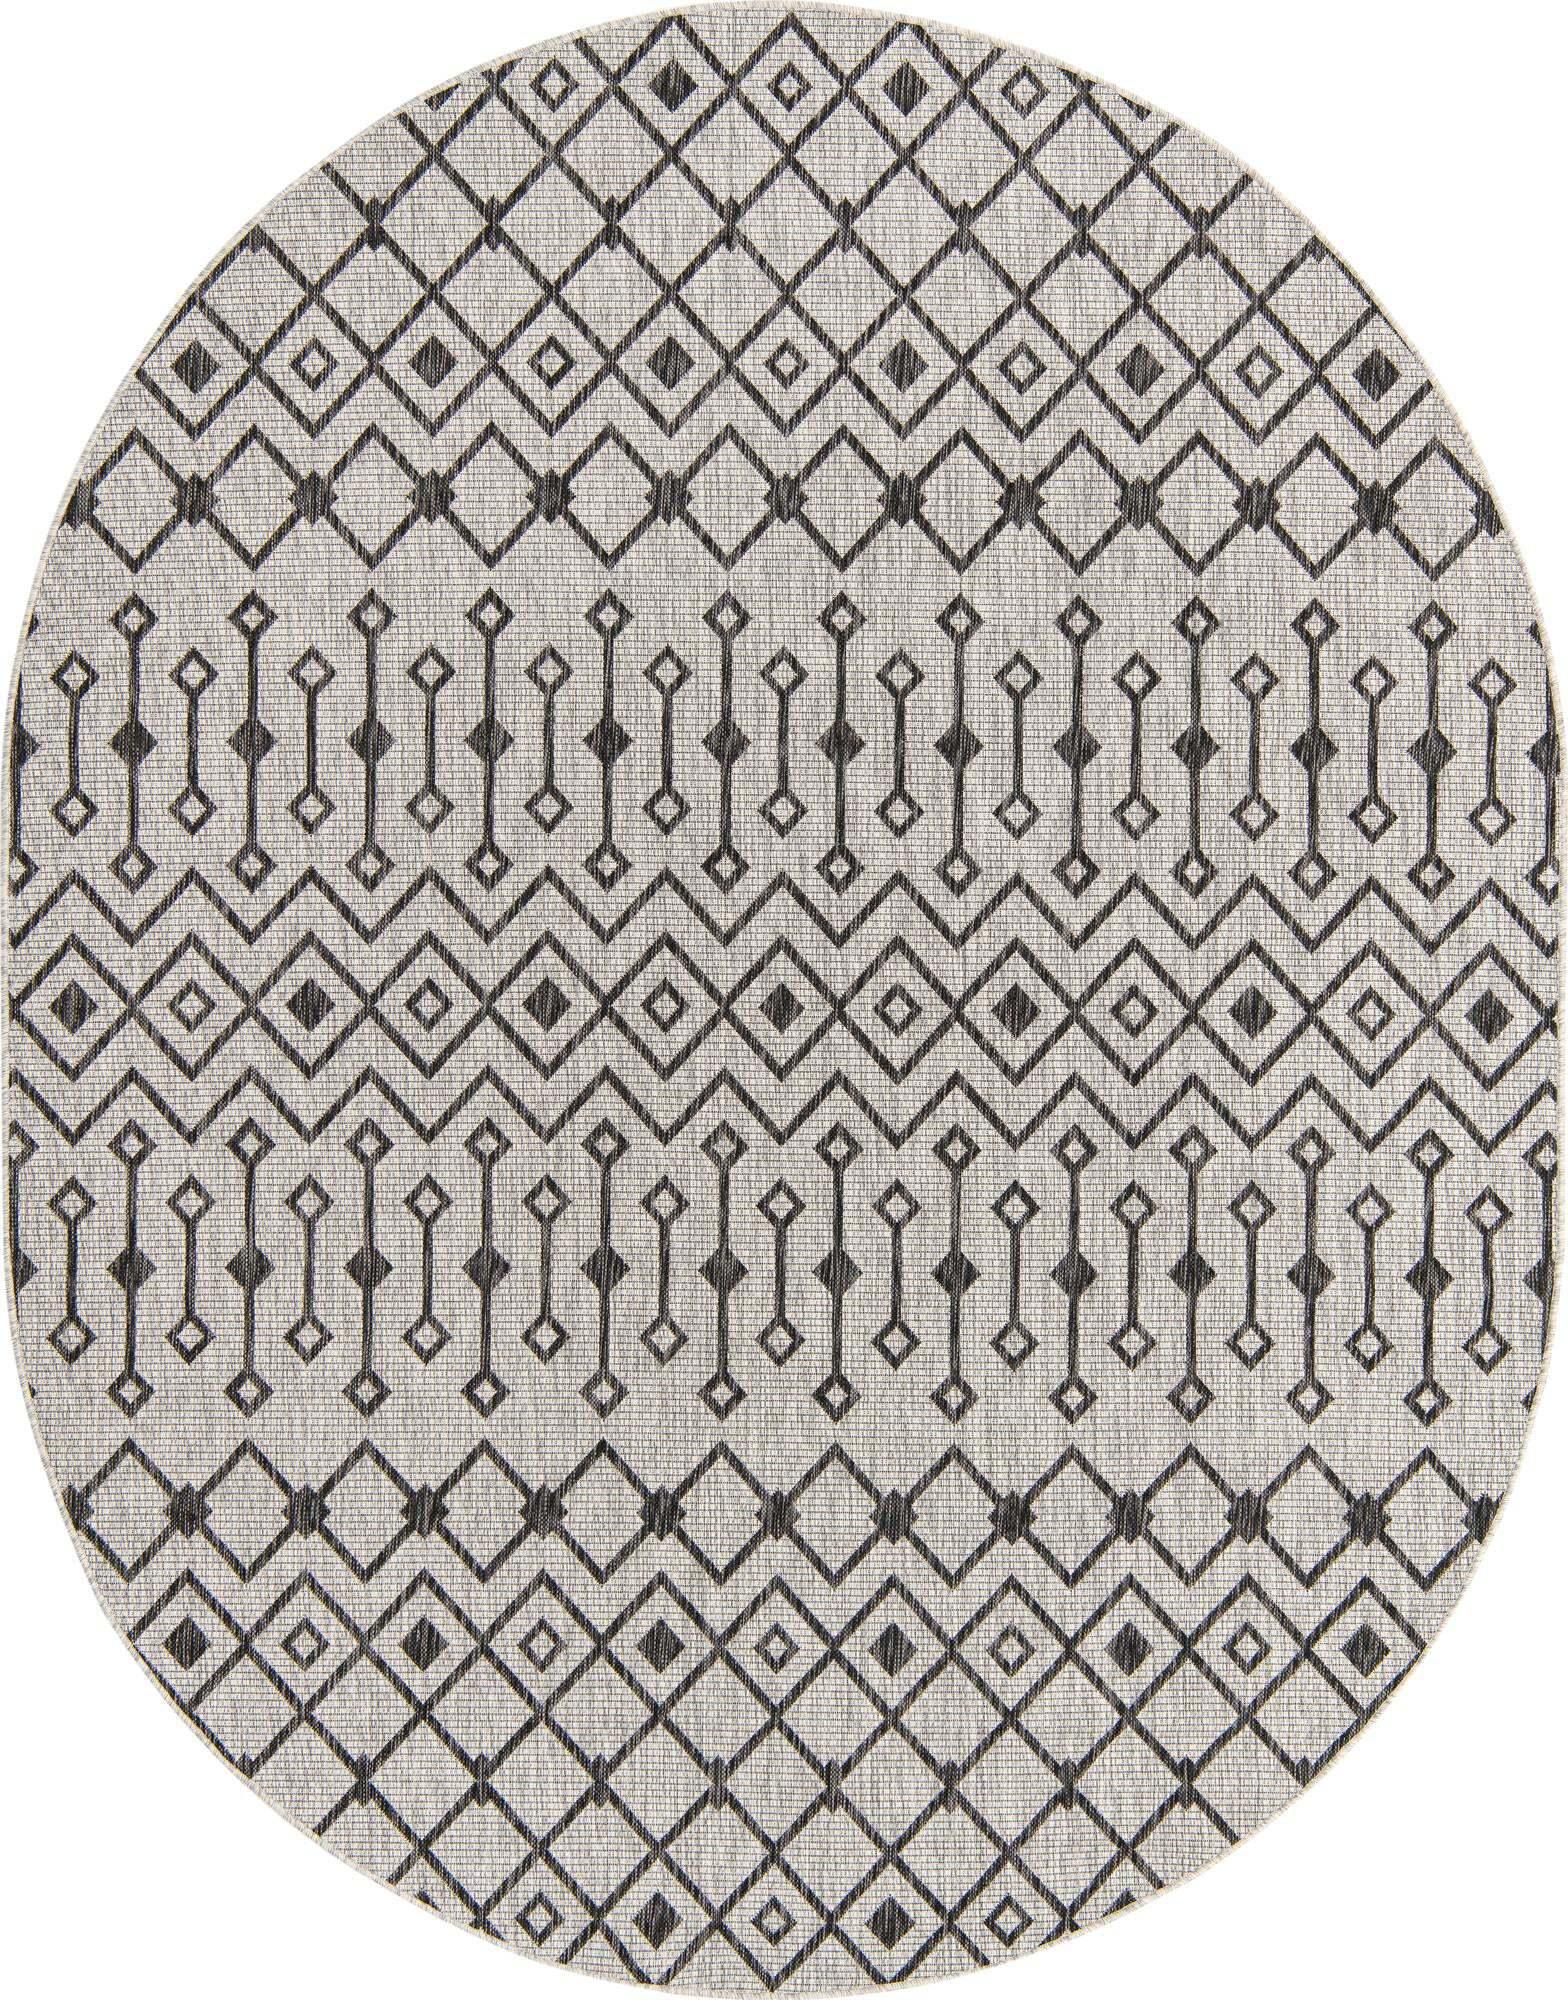 Unique Loom Outdoor Rugs - Outdoor Trellis Geometric Oval 8x10 Oval Rug Light Gray & Blue